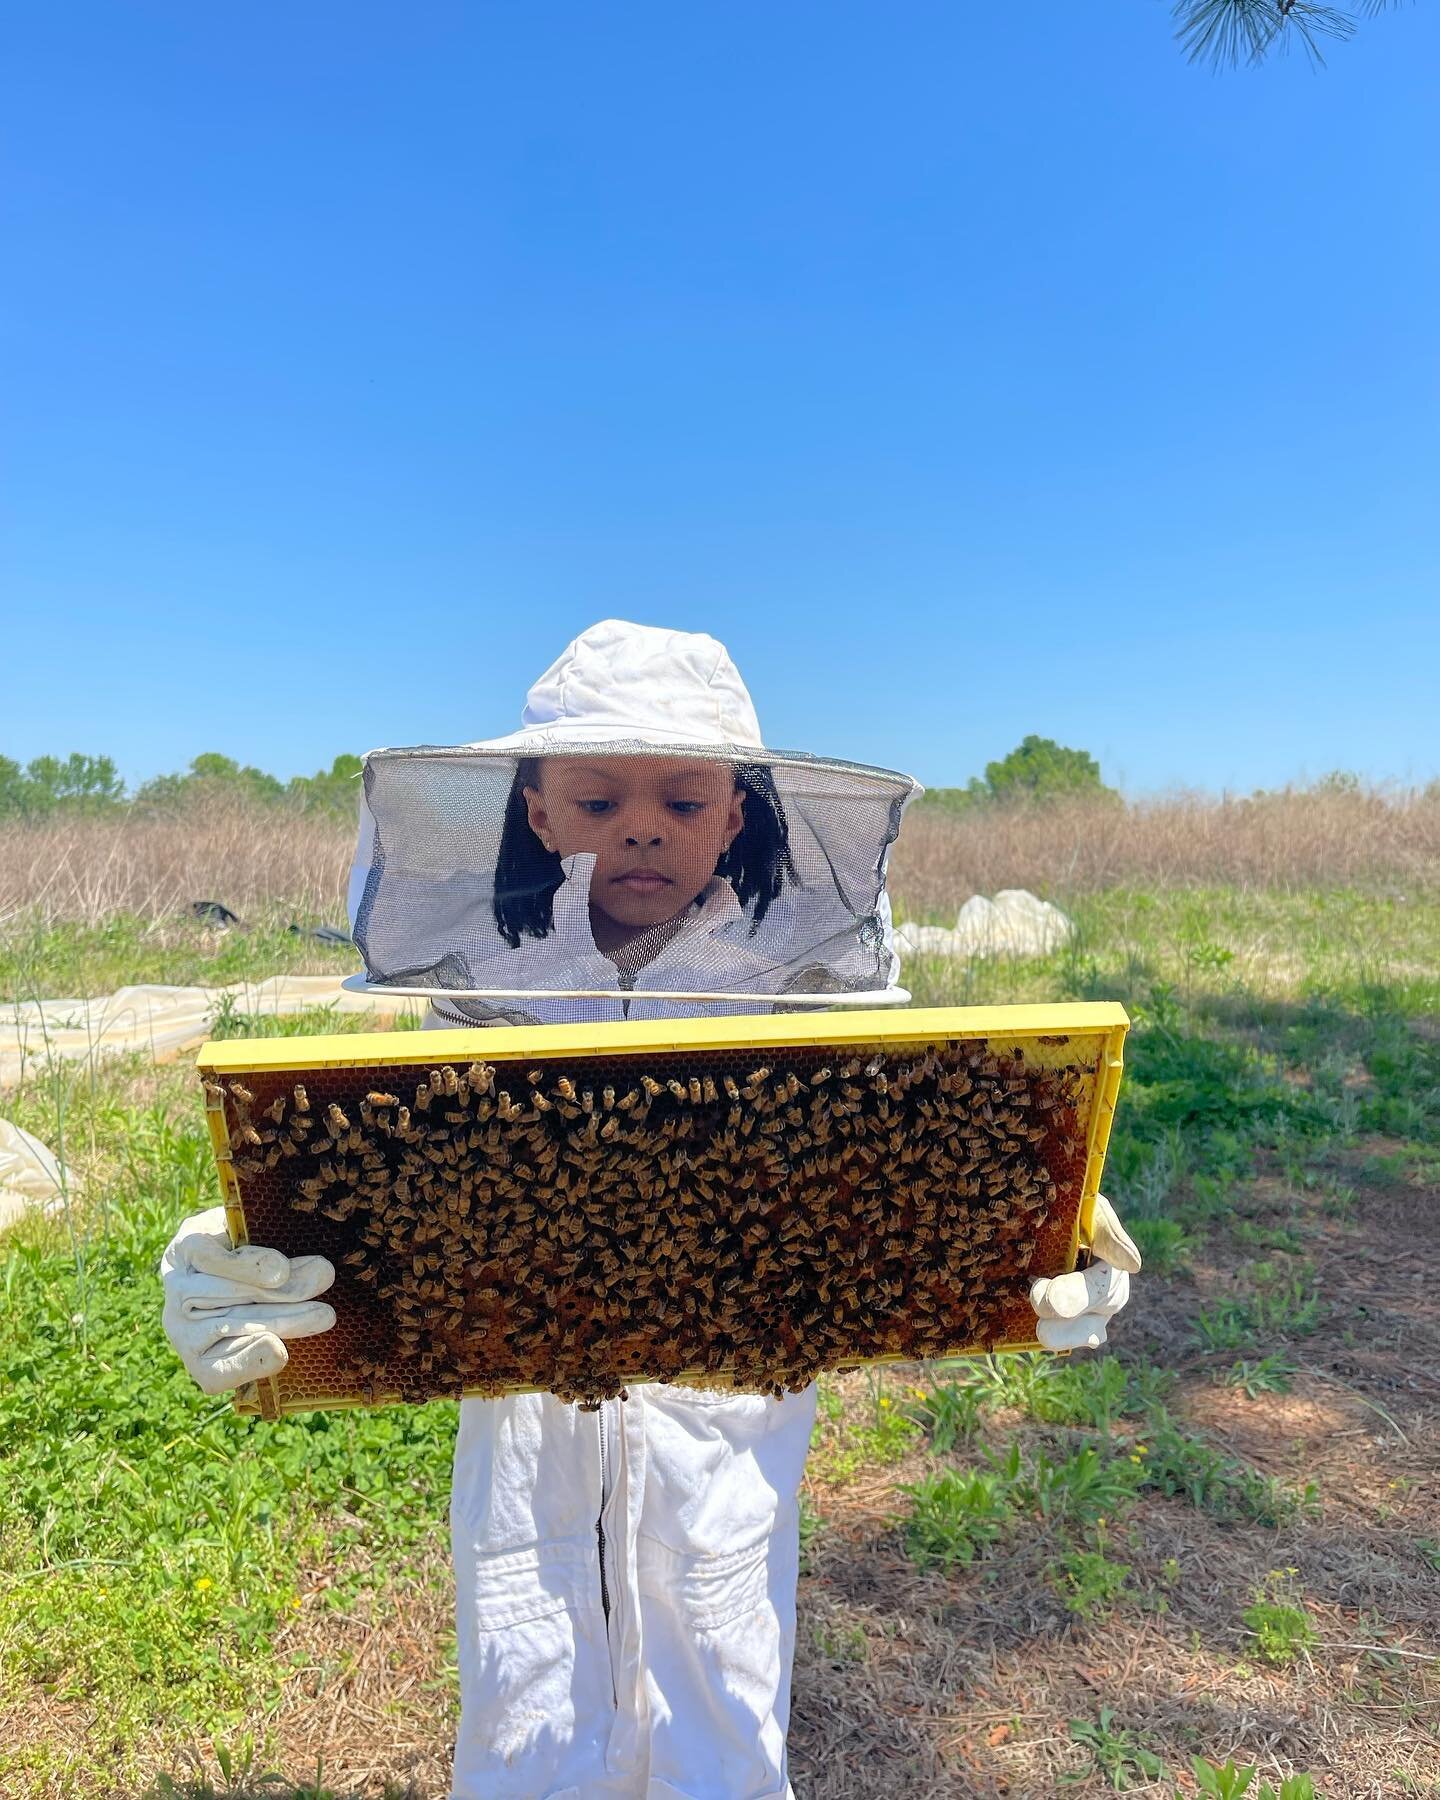 Whenever youth visit our @airbnb Bees In The TRAP it&rsquo;s always a special experience! We believe exposure is key! 

#youthfarming #blackfarmers #gardening #beekeeping #airbnb